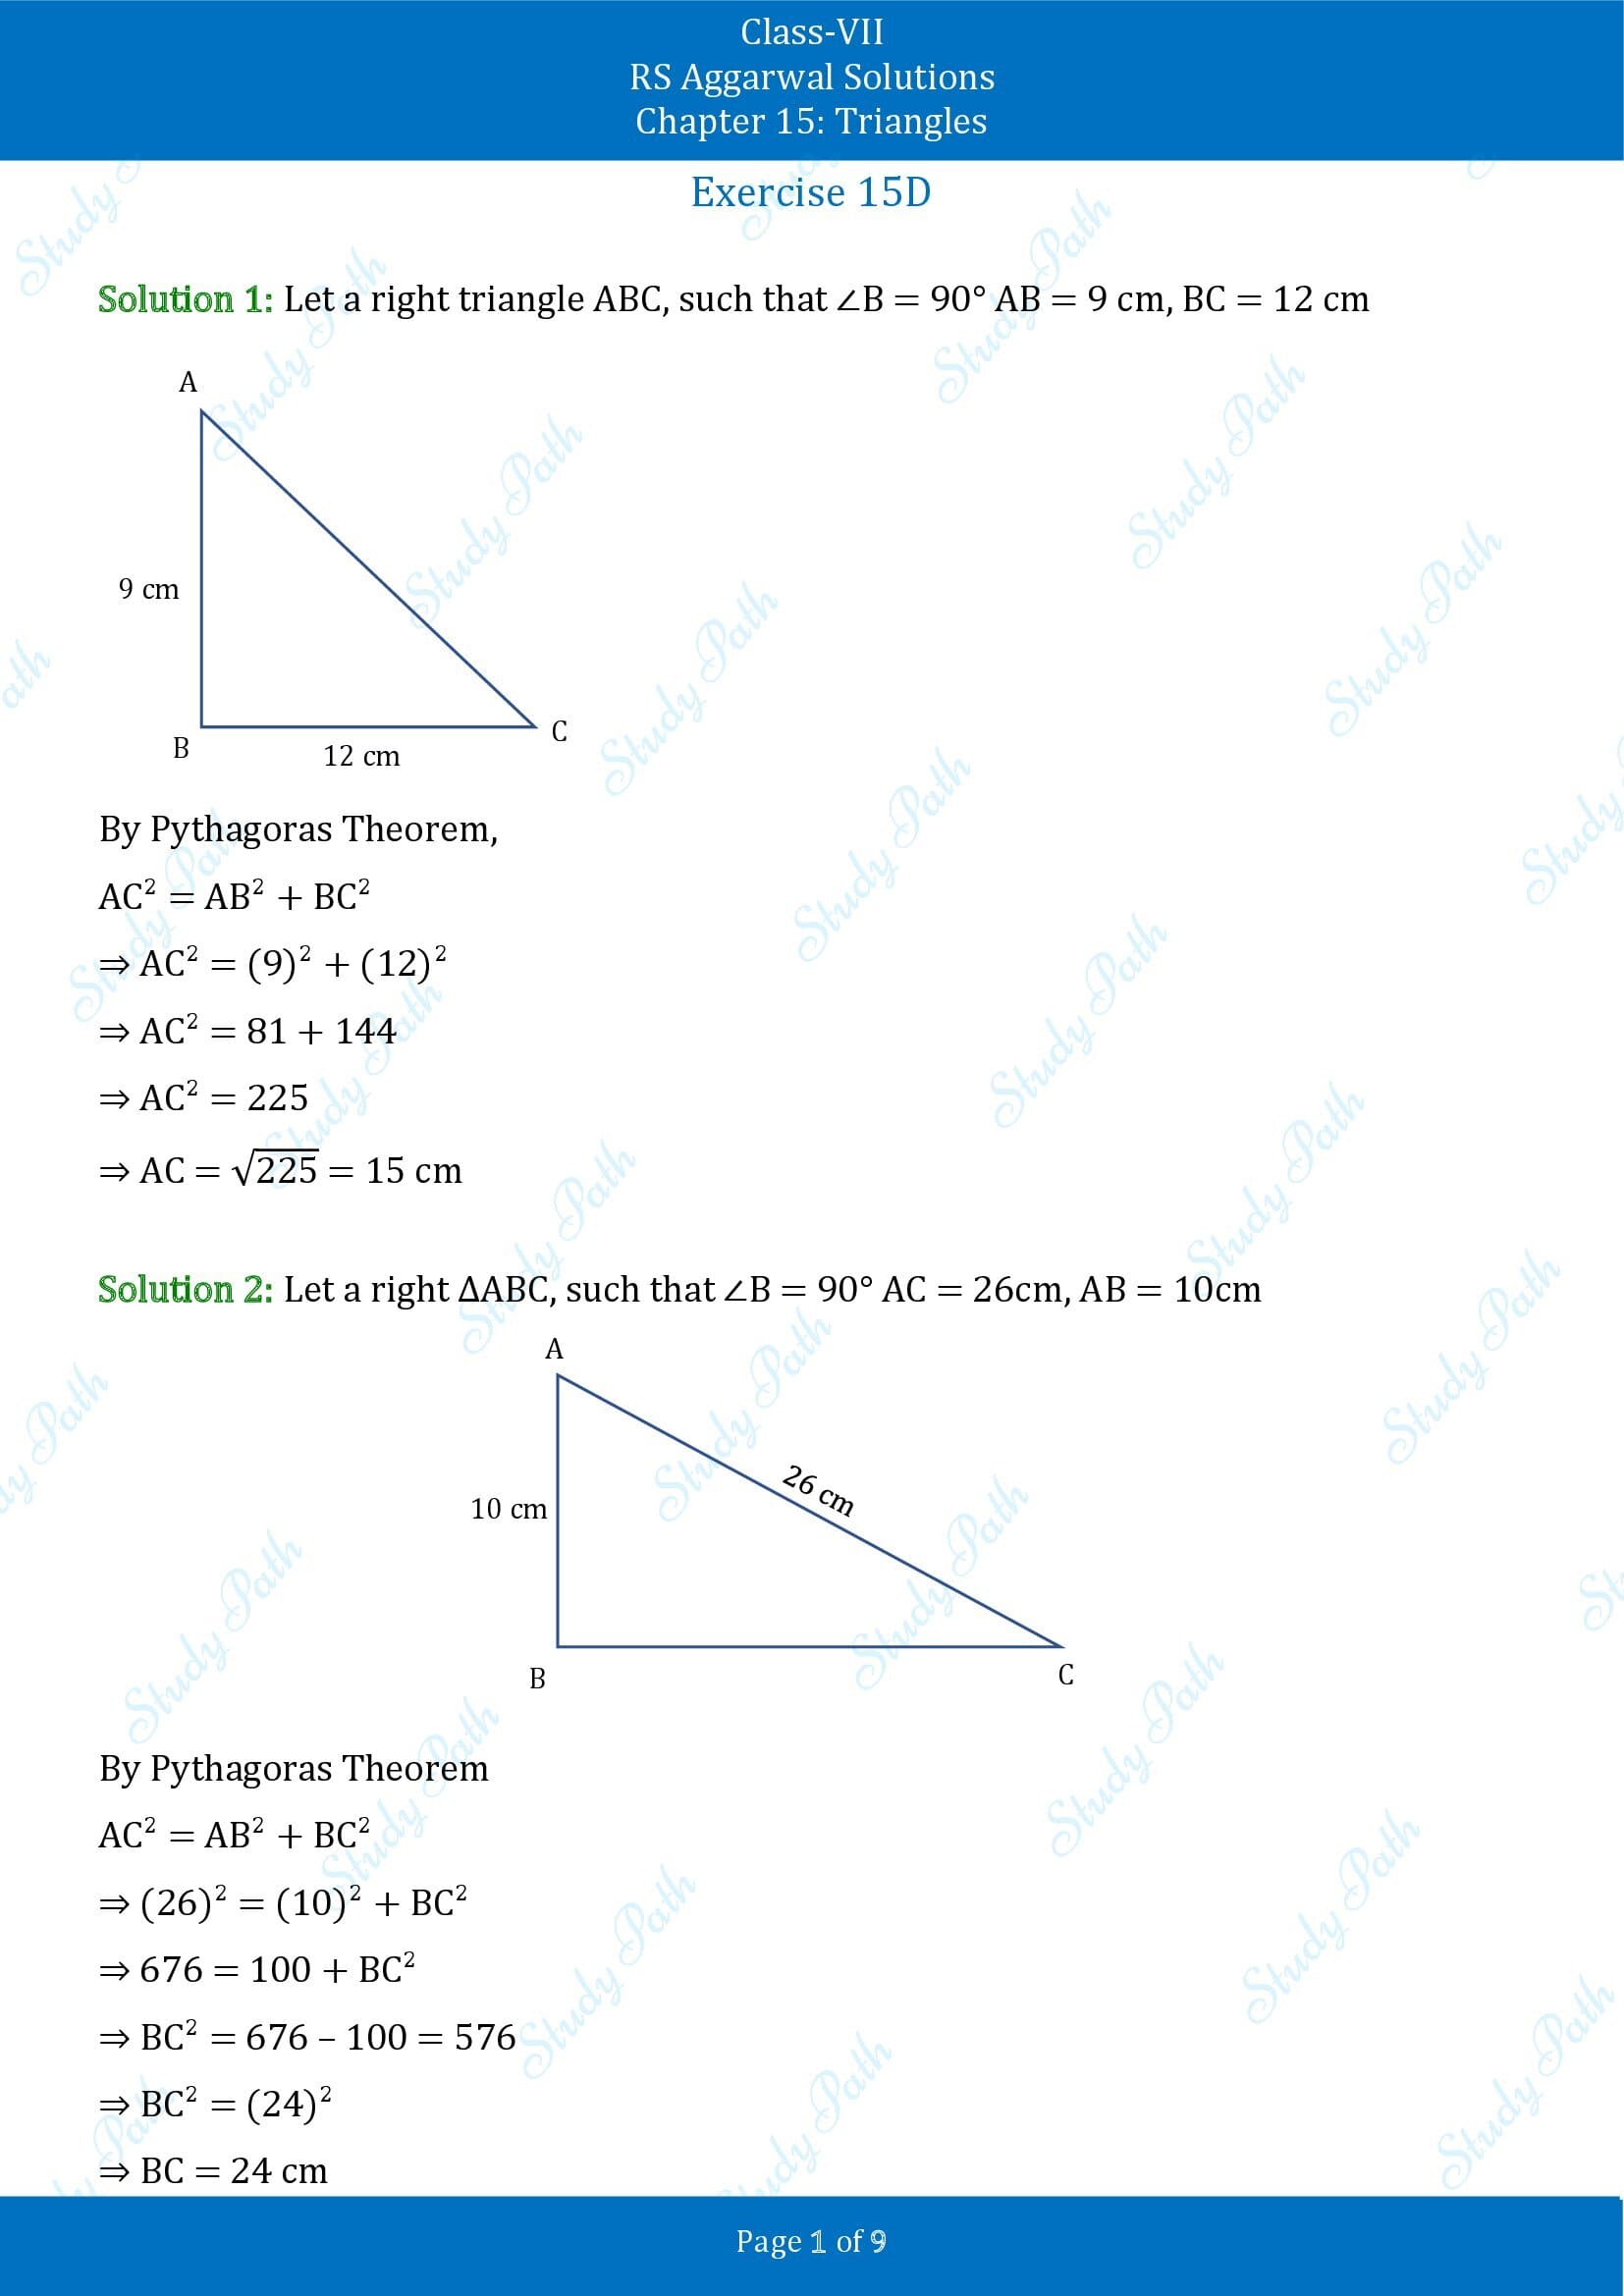 RS Aggarwal Solutions Class 7 Chapter 15 Triangles Exercise 15D 00001